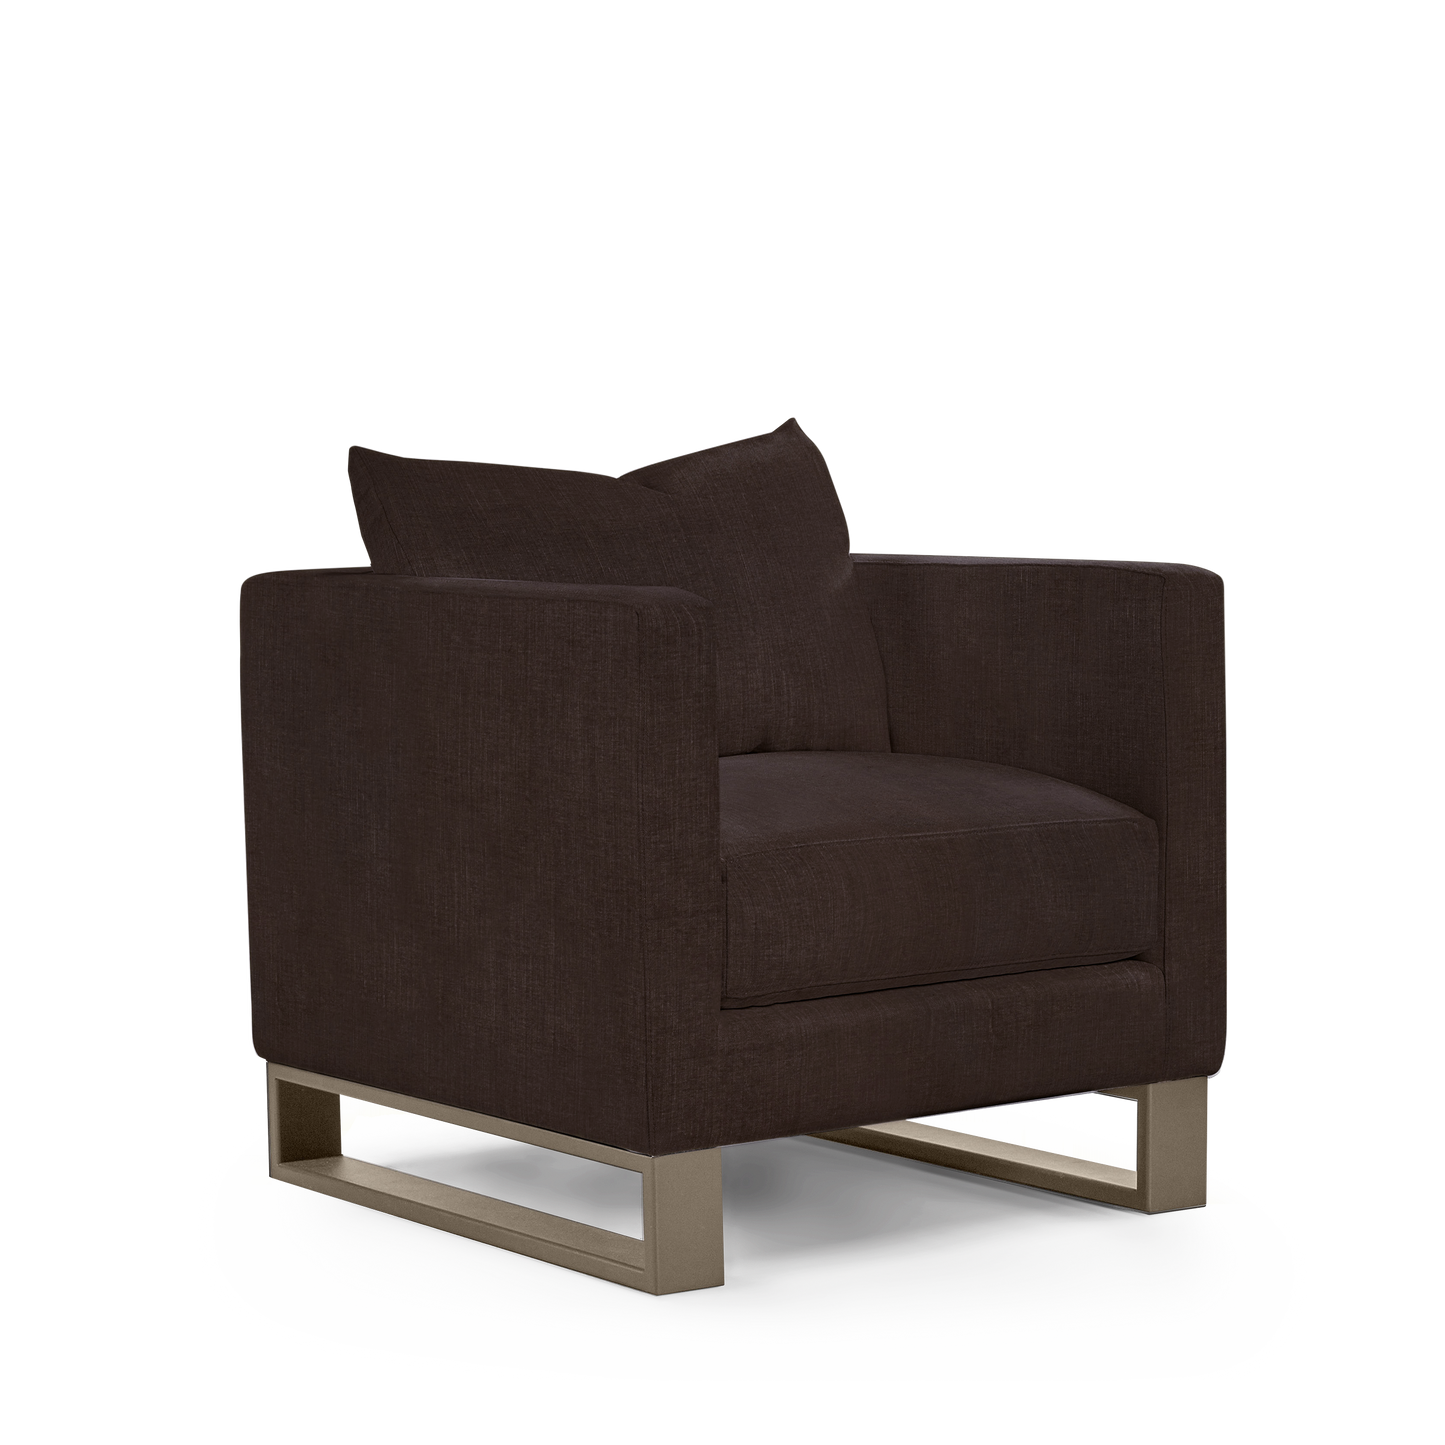 Atlin armchair with linara brown textile with champagne legs